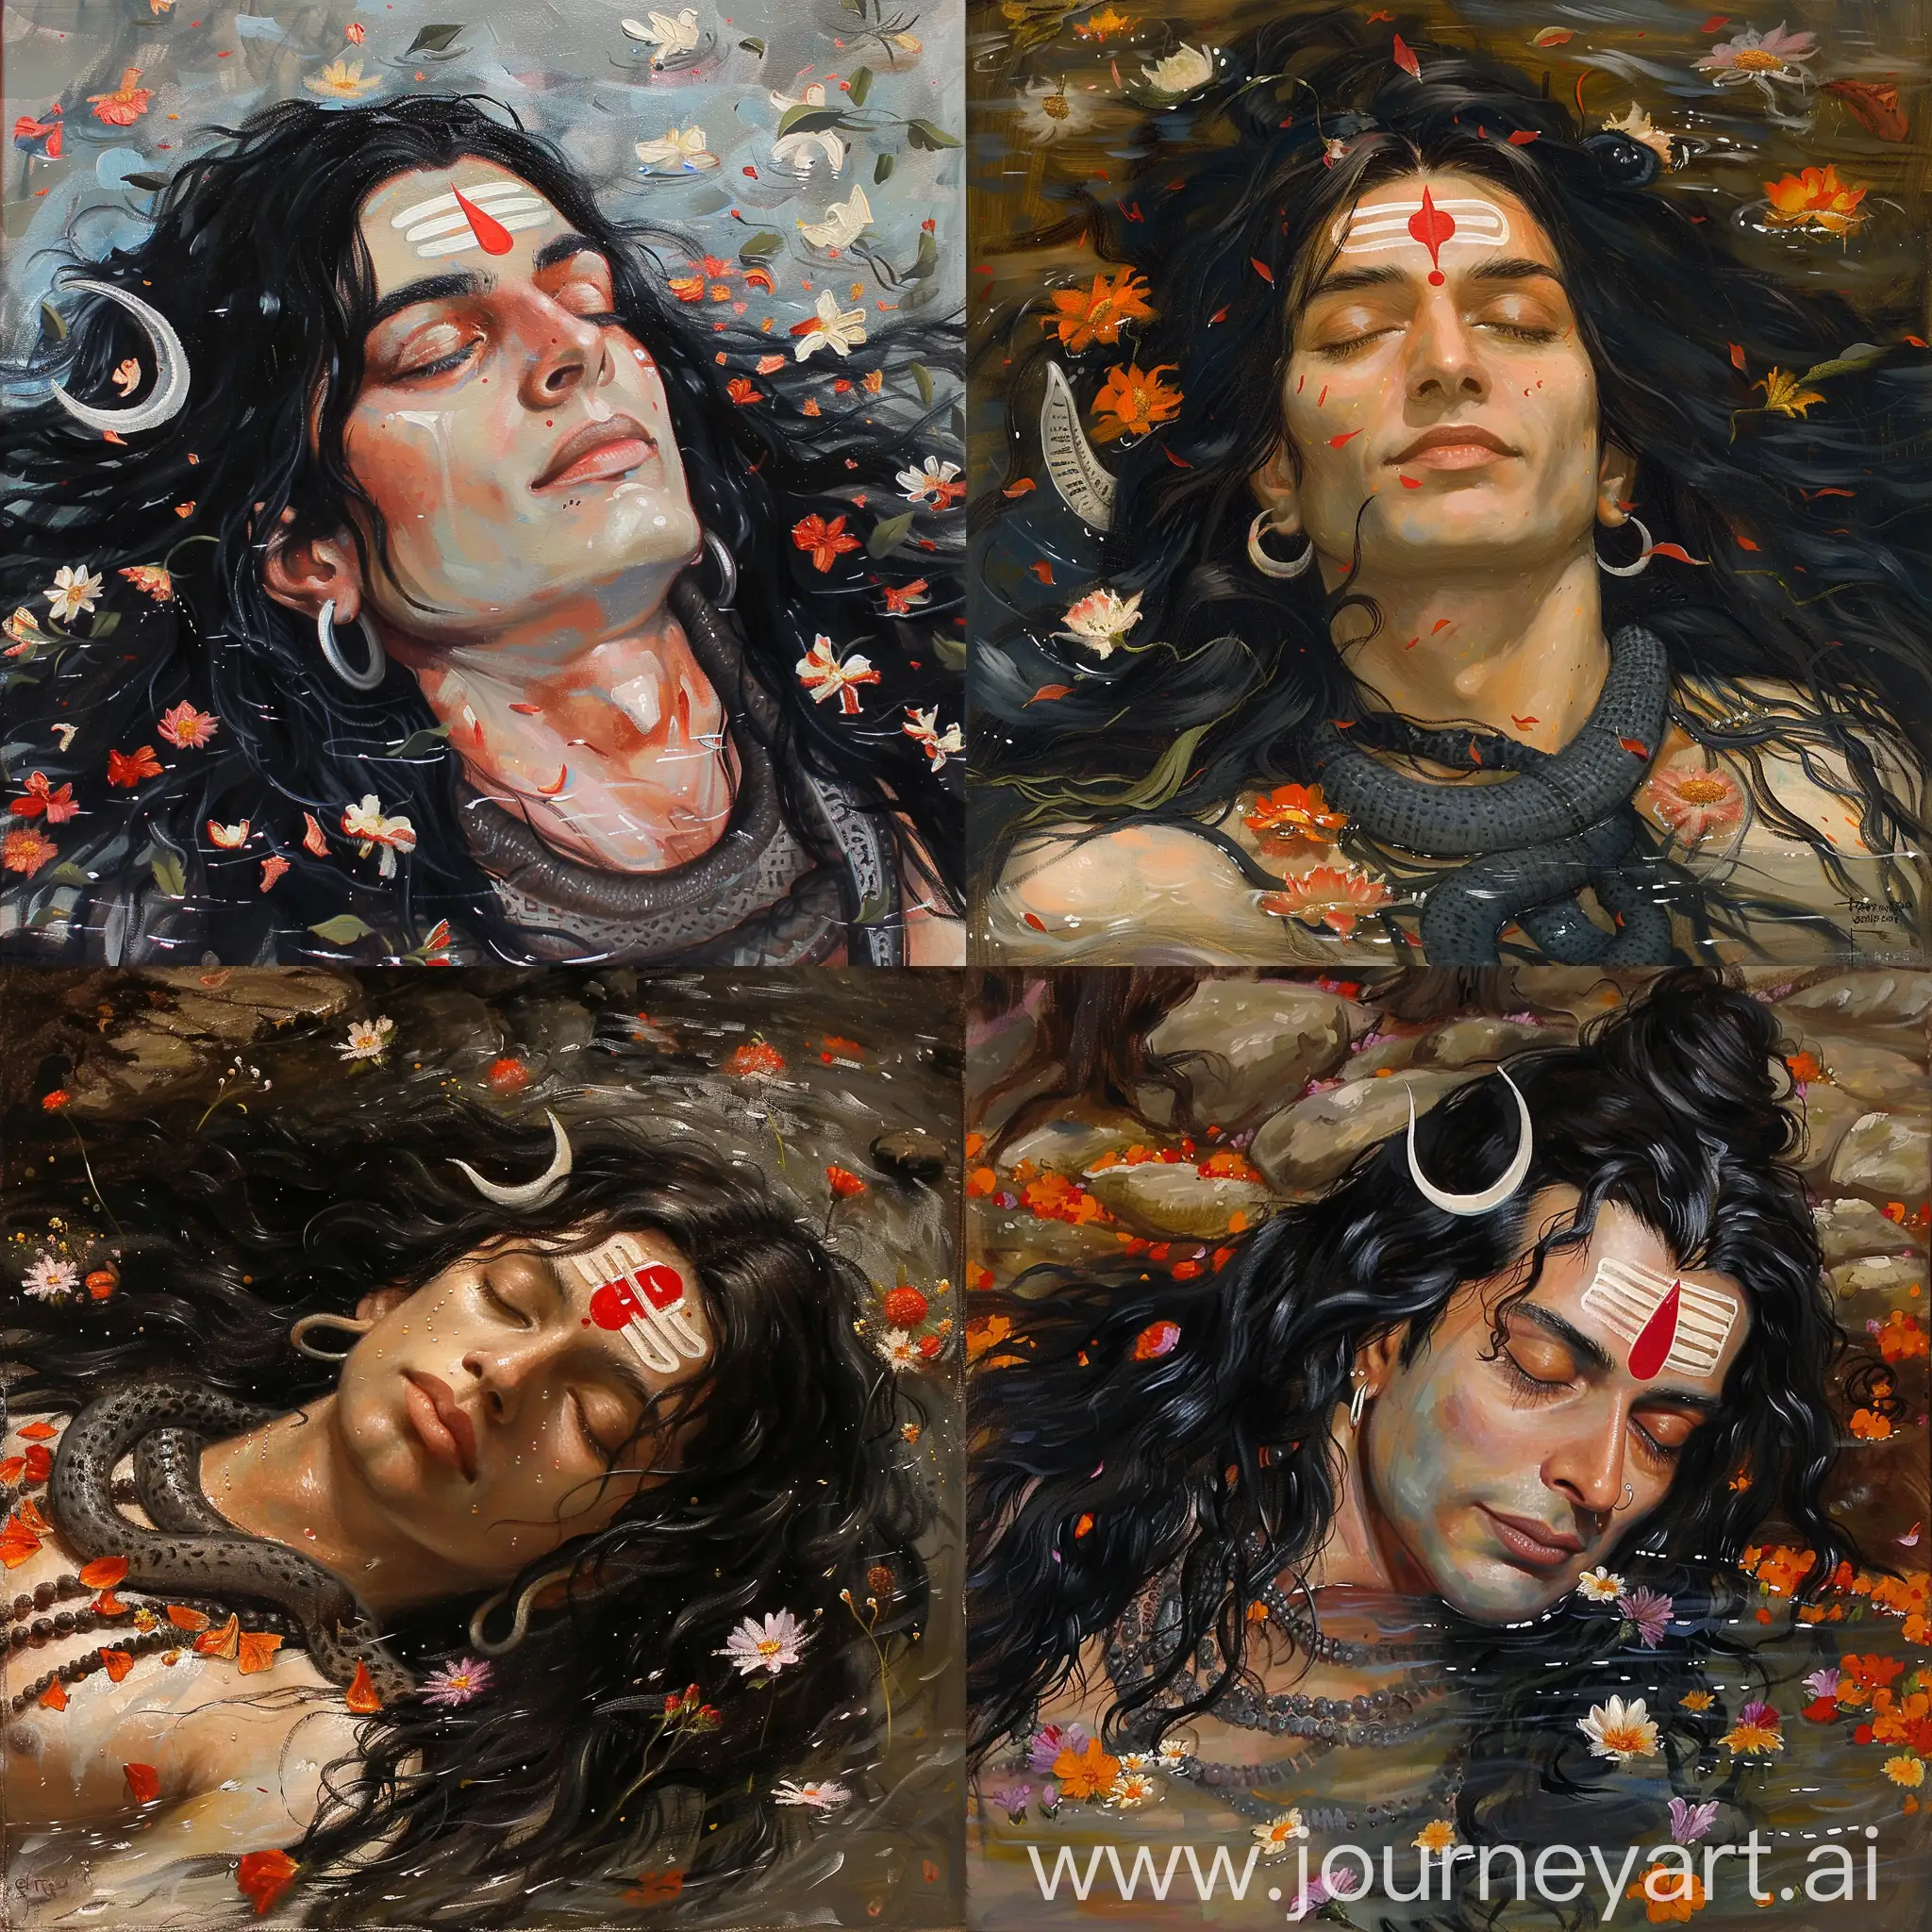 An oil painting of a Lord Shiva with long black hair and a red dot on his forehead. He is lying in a river with his eyes closed and flowers floating around him 